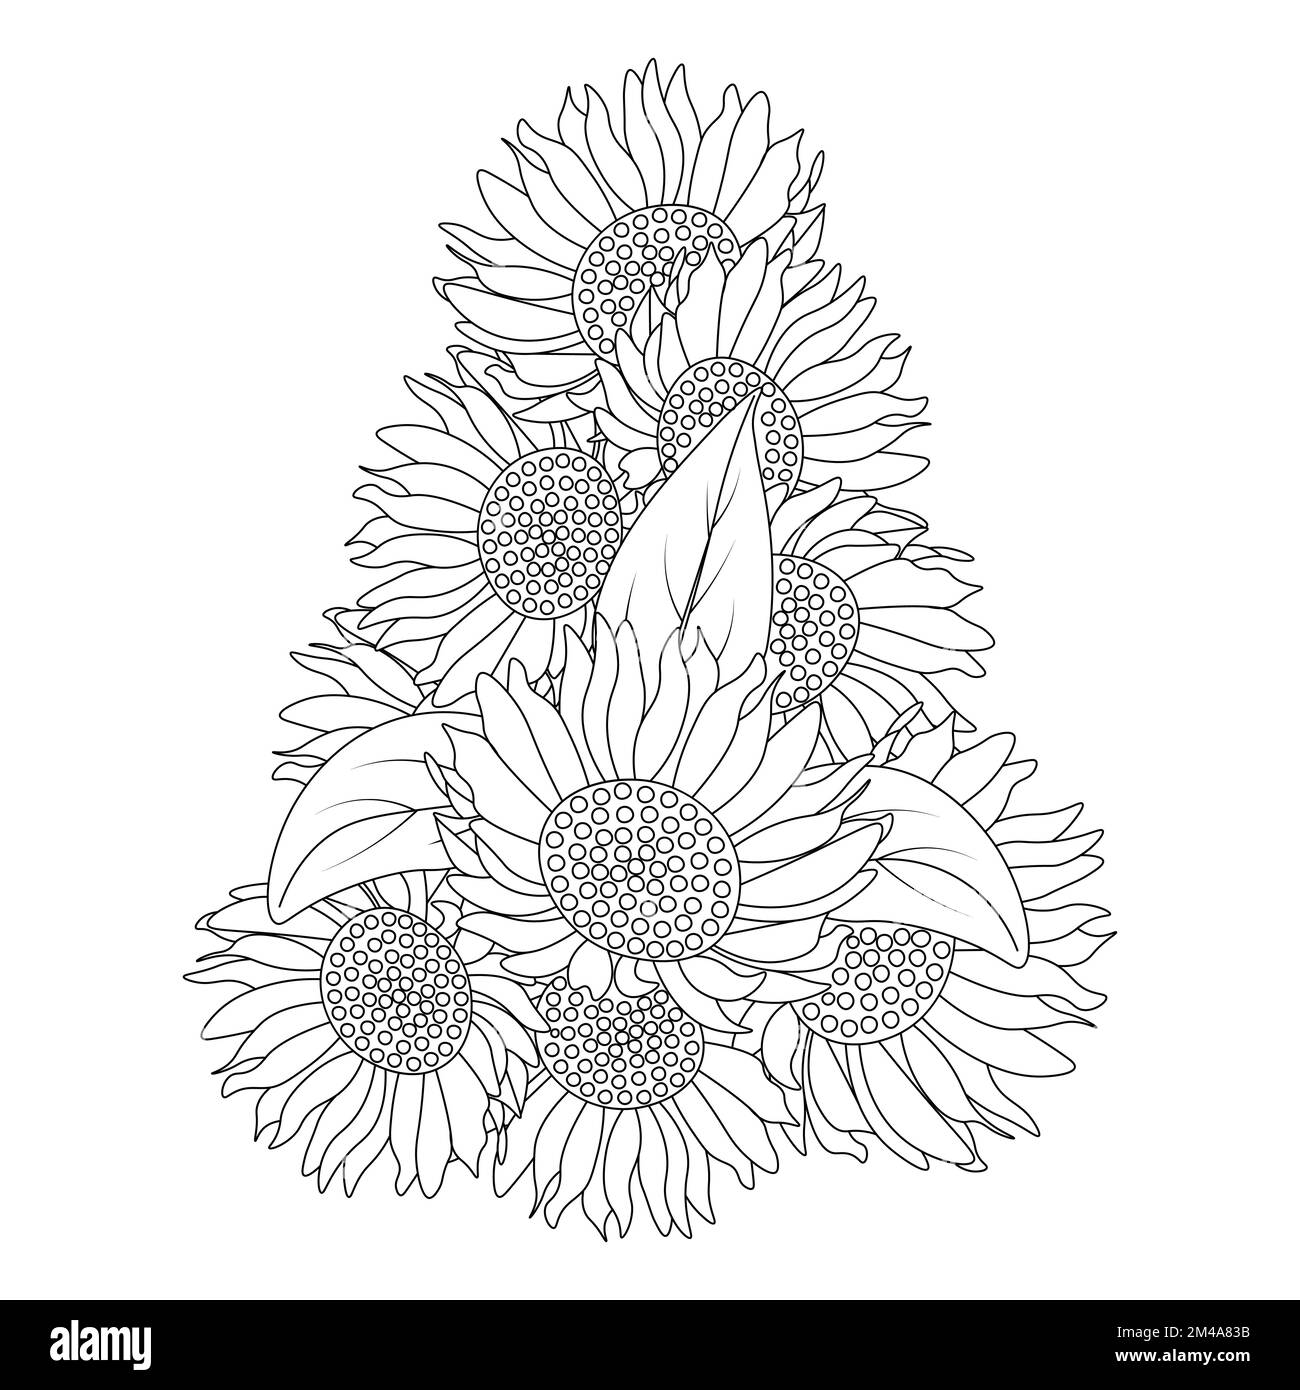 draw coloring book pages for adults